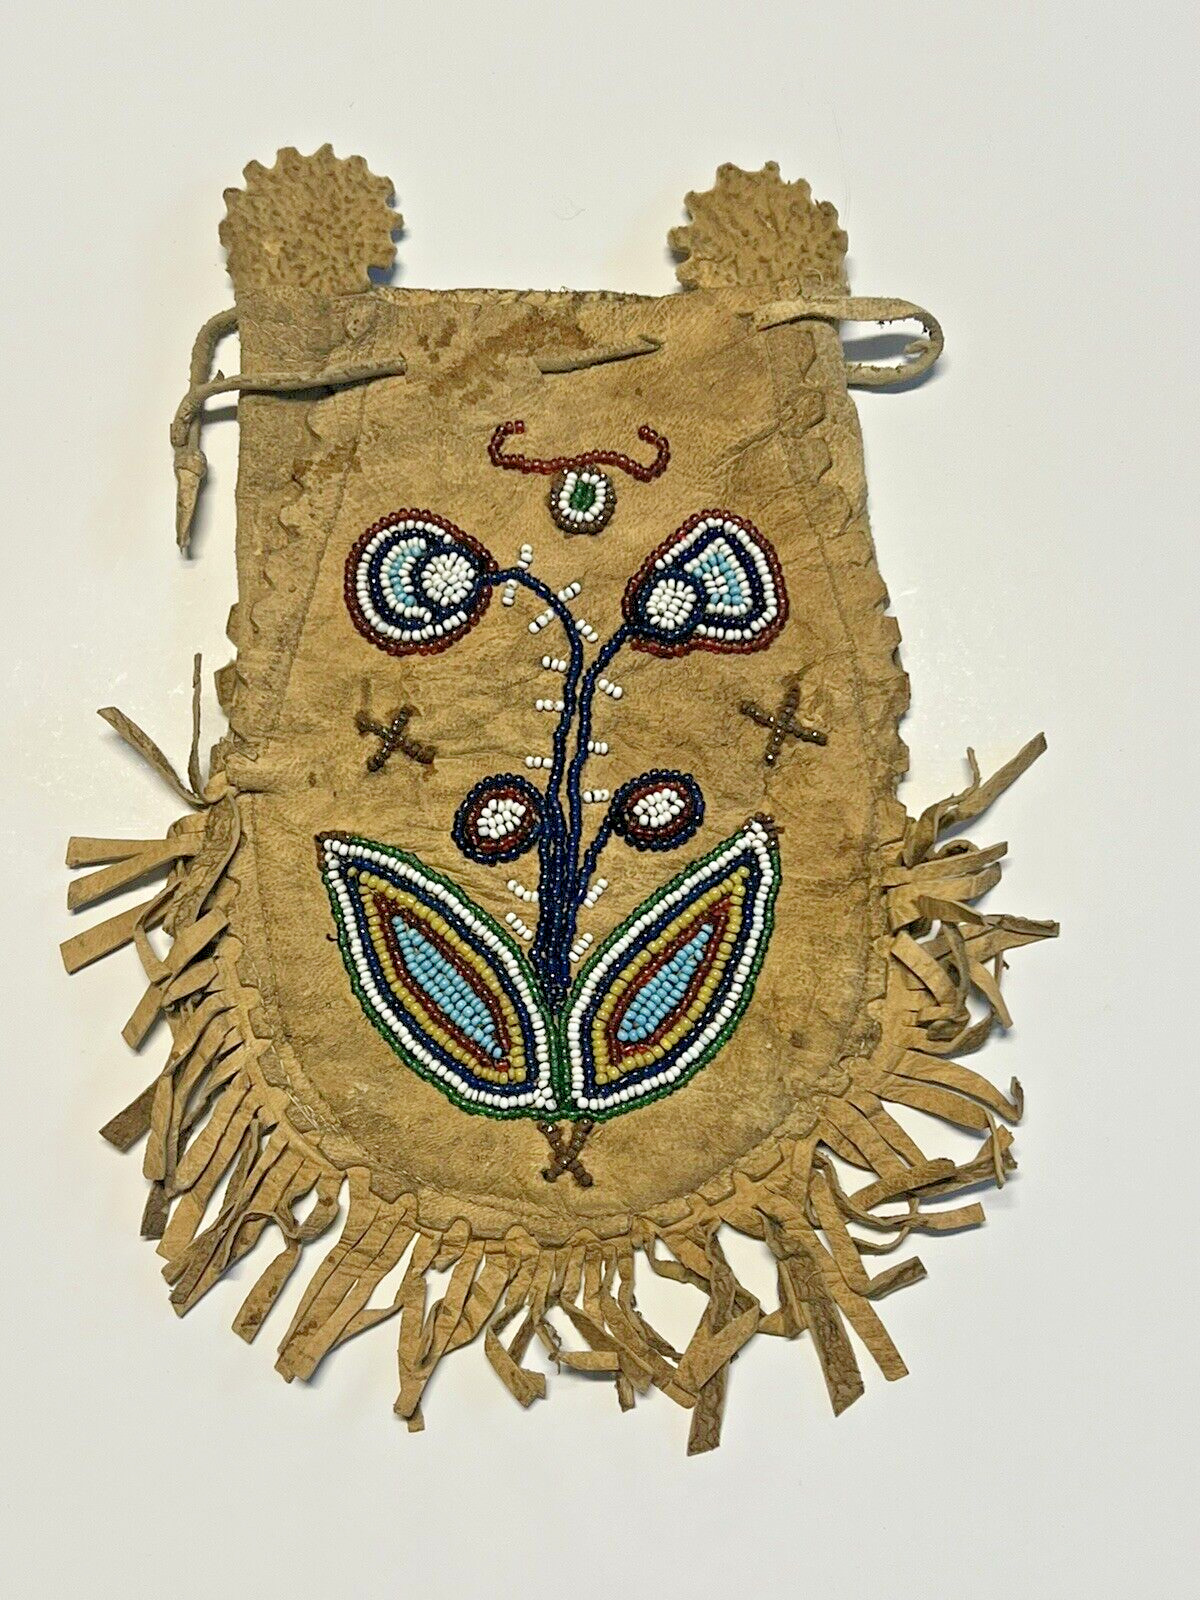 Antique Original SIOUX INDIAN BEAD DECORATED HIDE DRAWSTRING BAG BELT POUCH